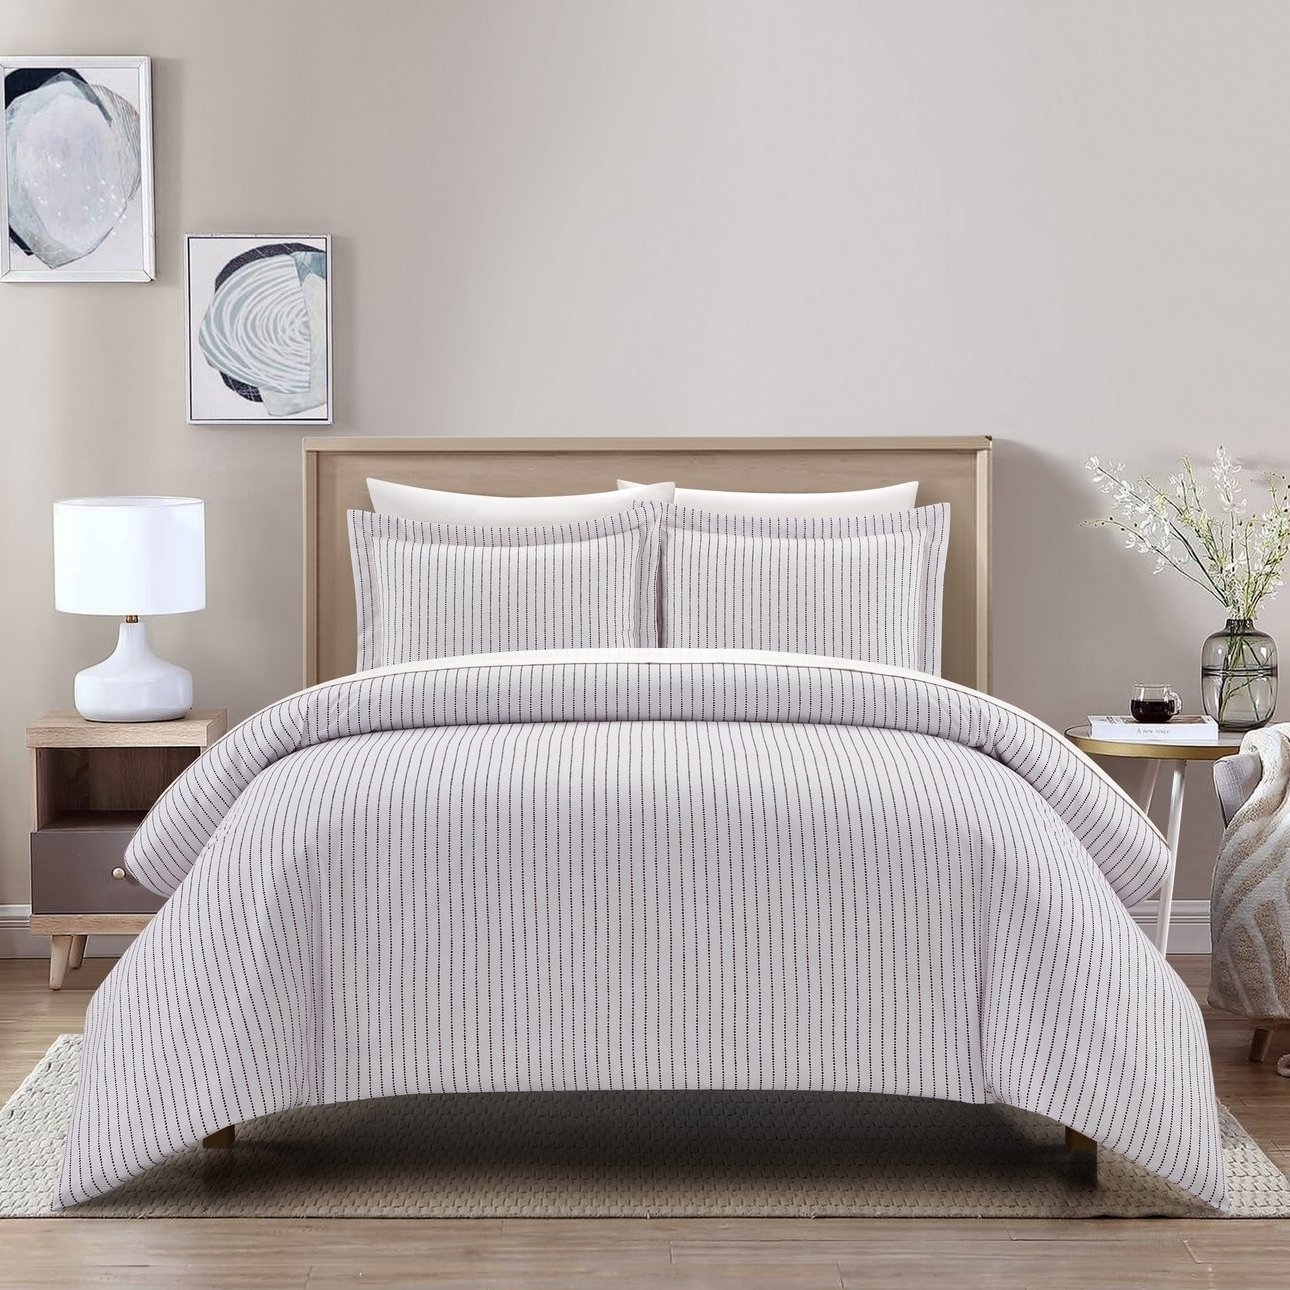 Vasey 2 Or 3 Piece Duvet Cover Set Contemporary Solid White With Dot Striped - Dark Purple, King